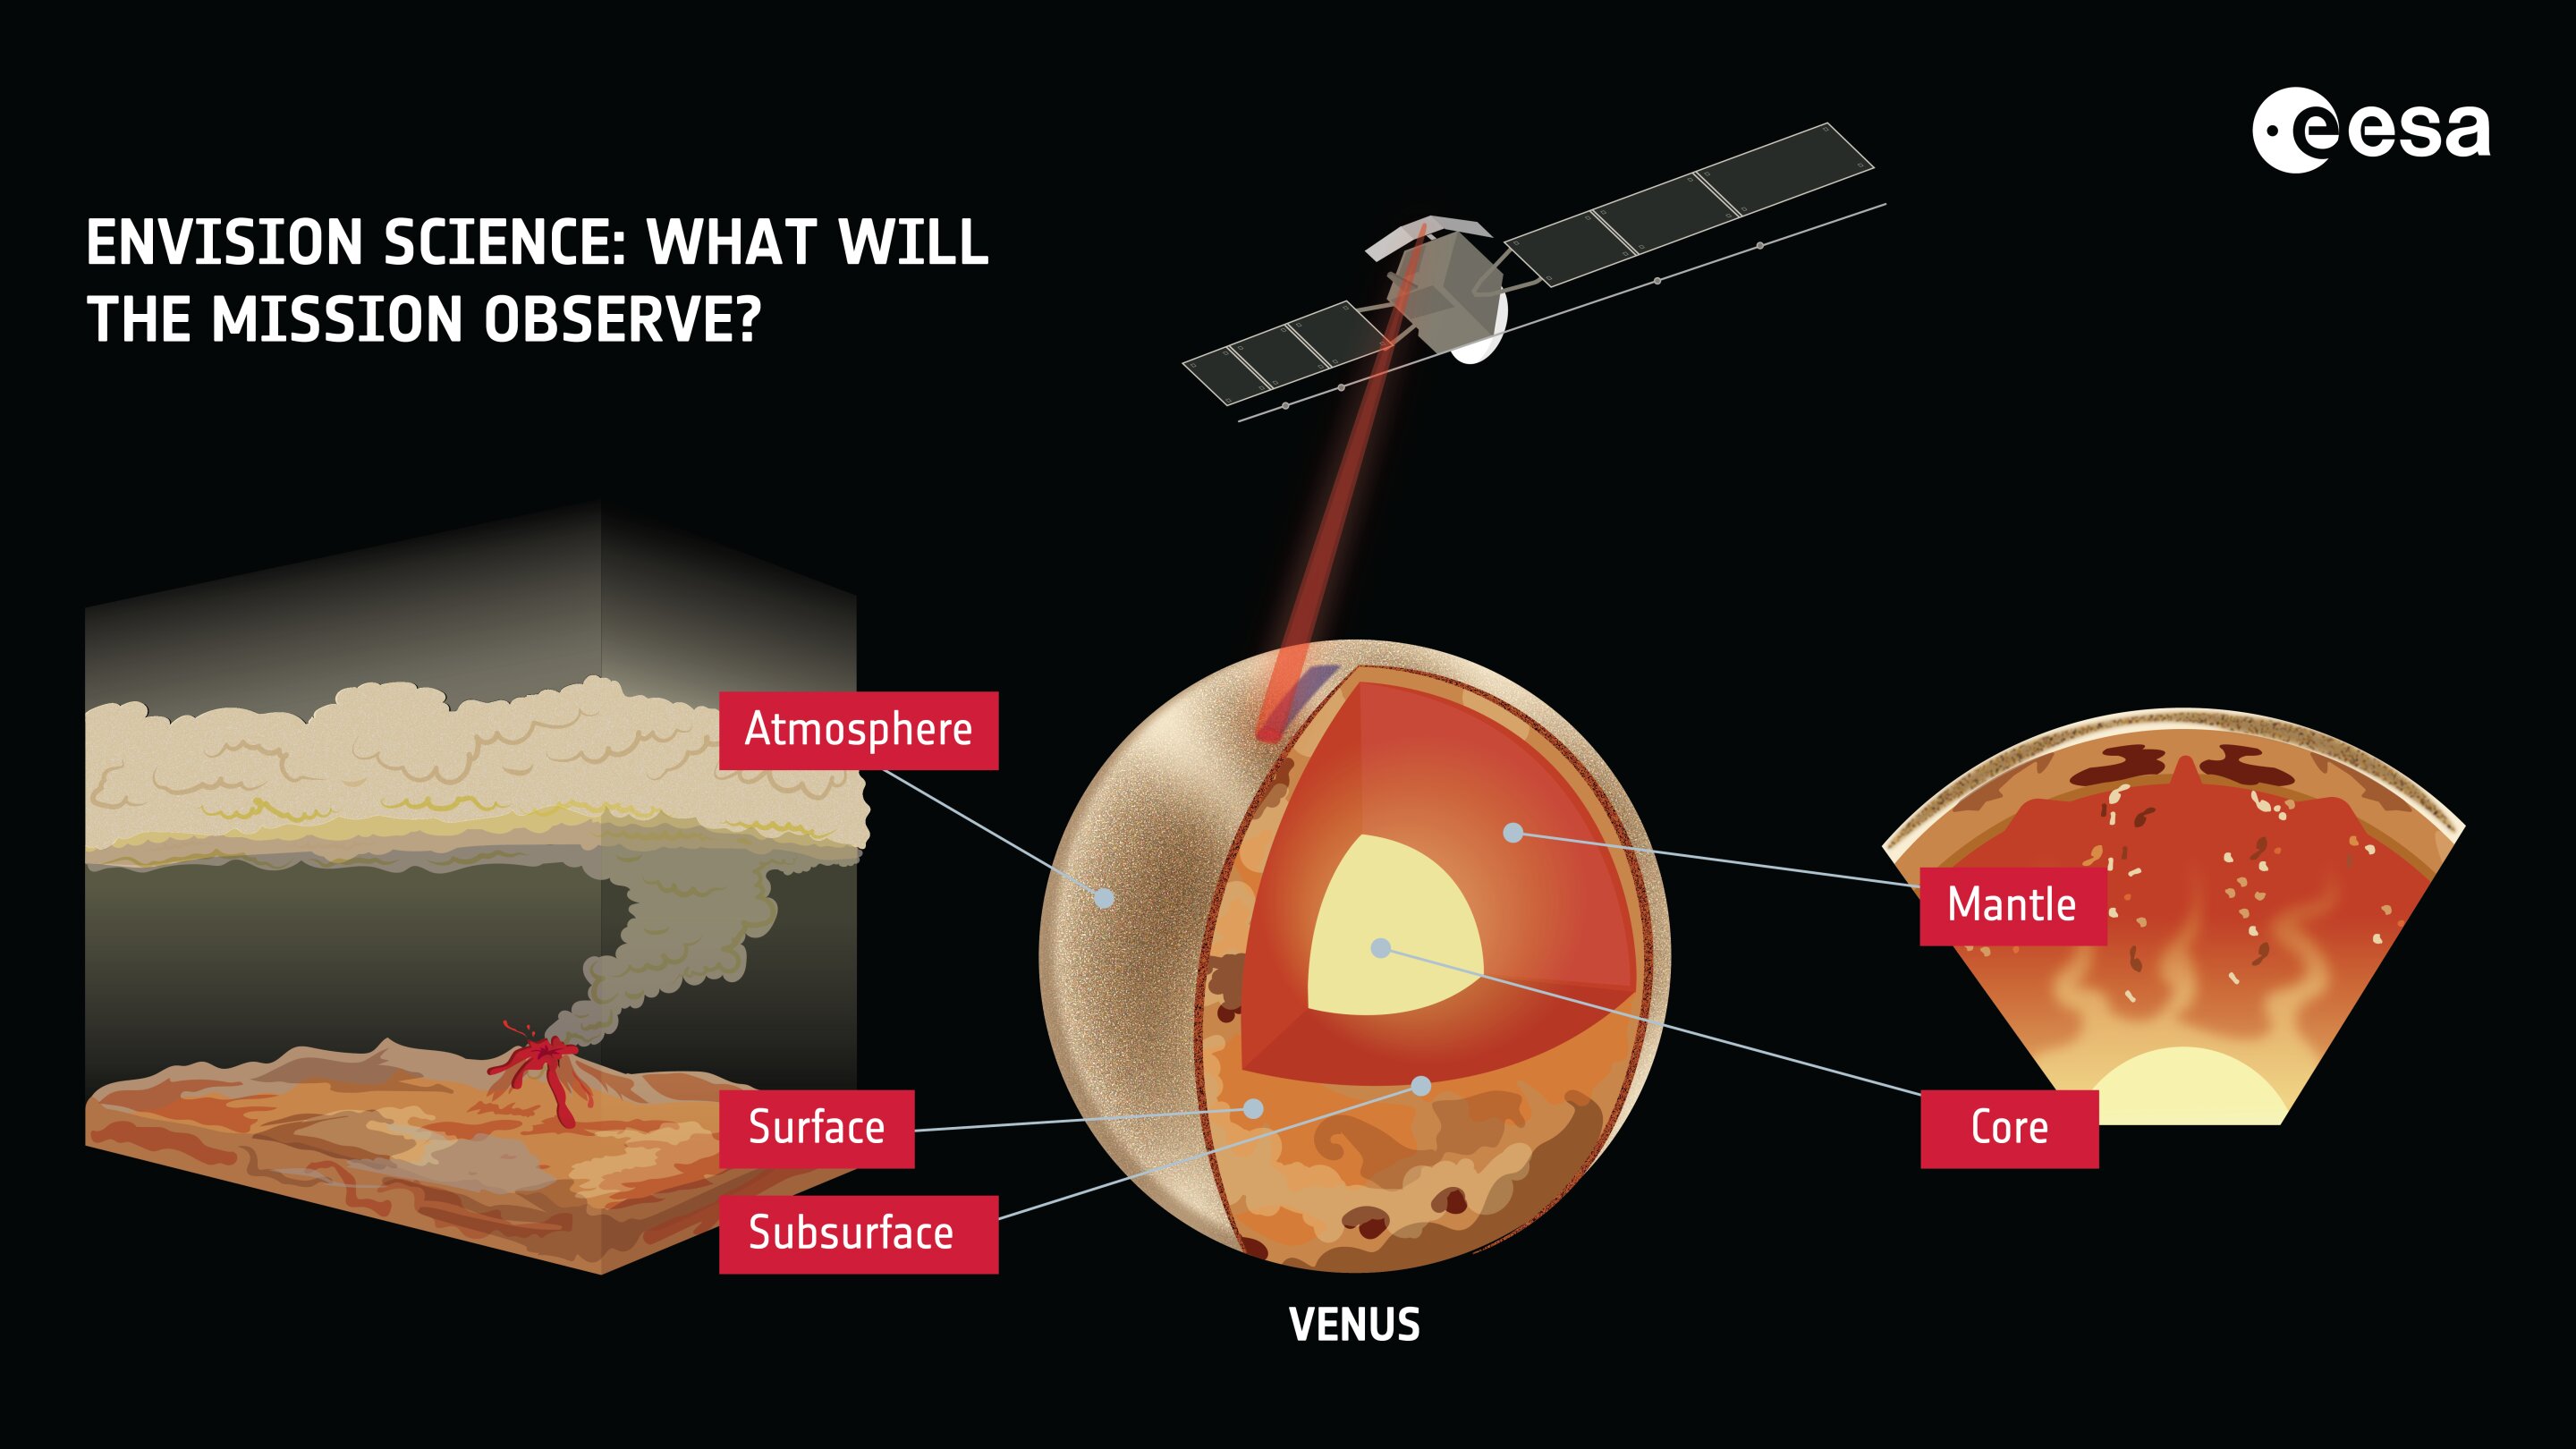 We're heading for Venus: ESA approves EnVision